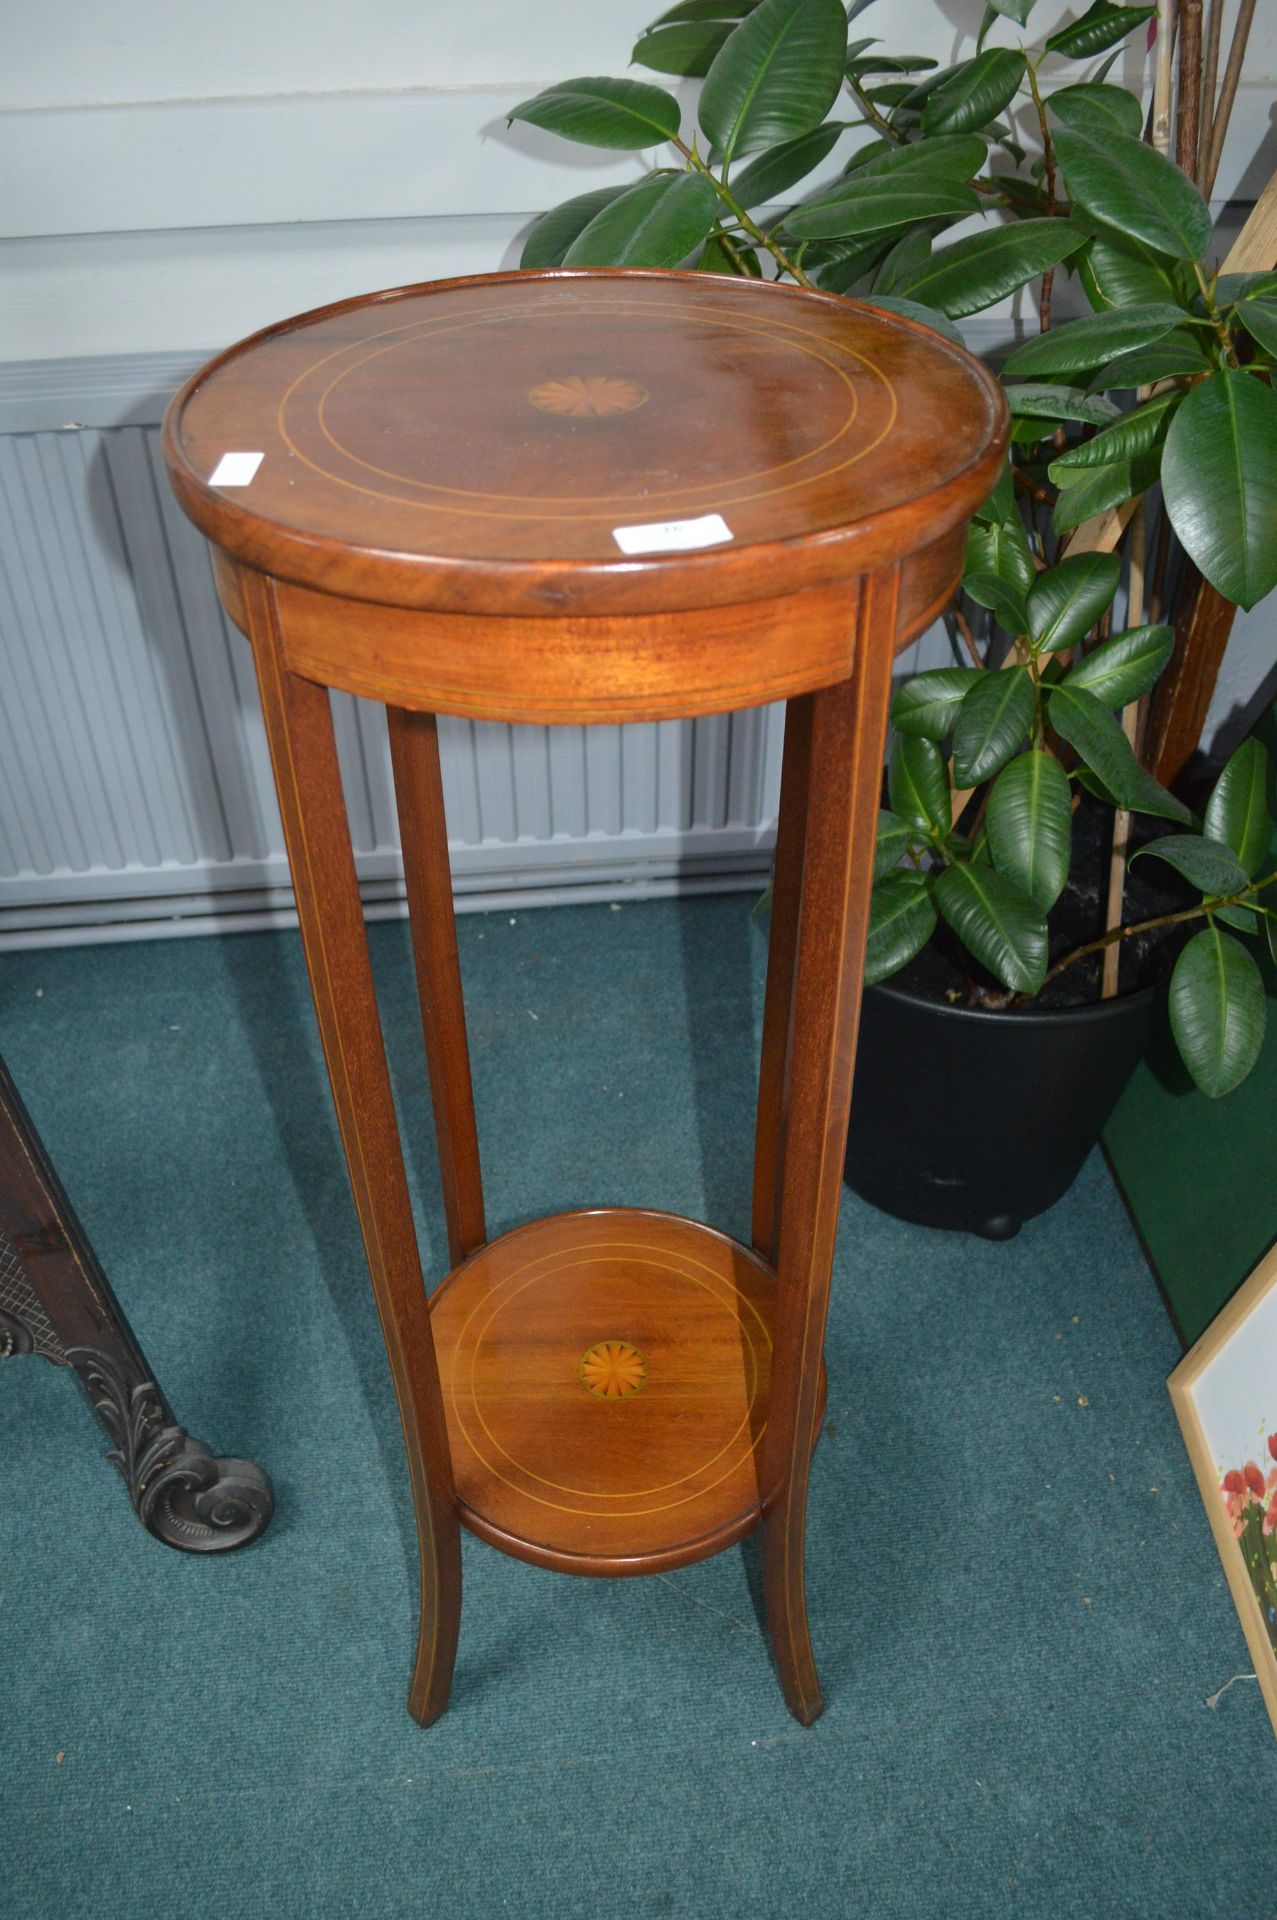 Edwardian Mahogany & Walt Plant Stand with Inlaid Design and Stringing